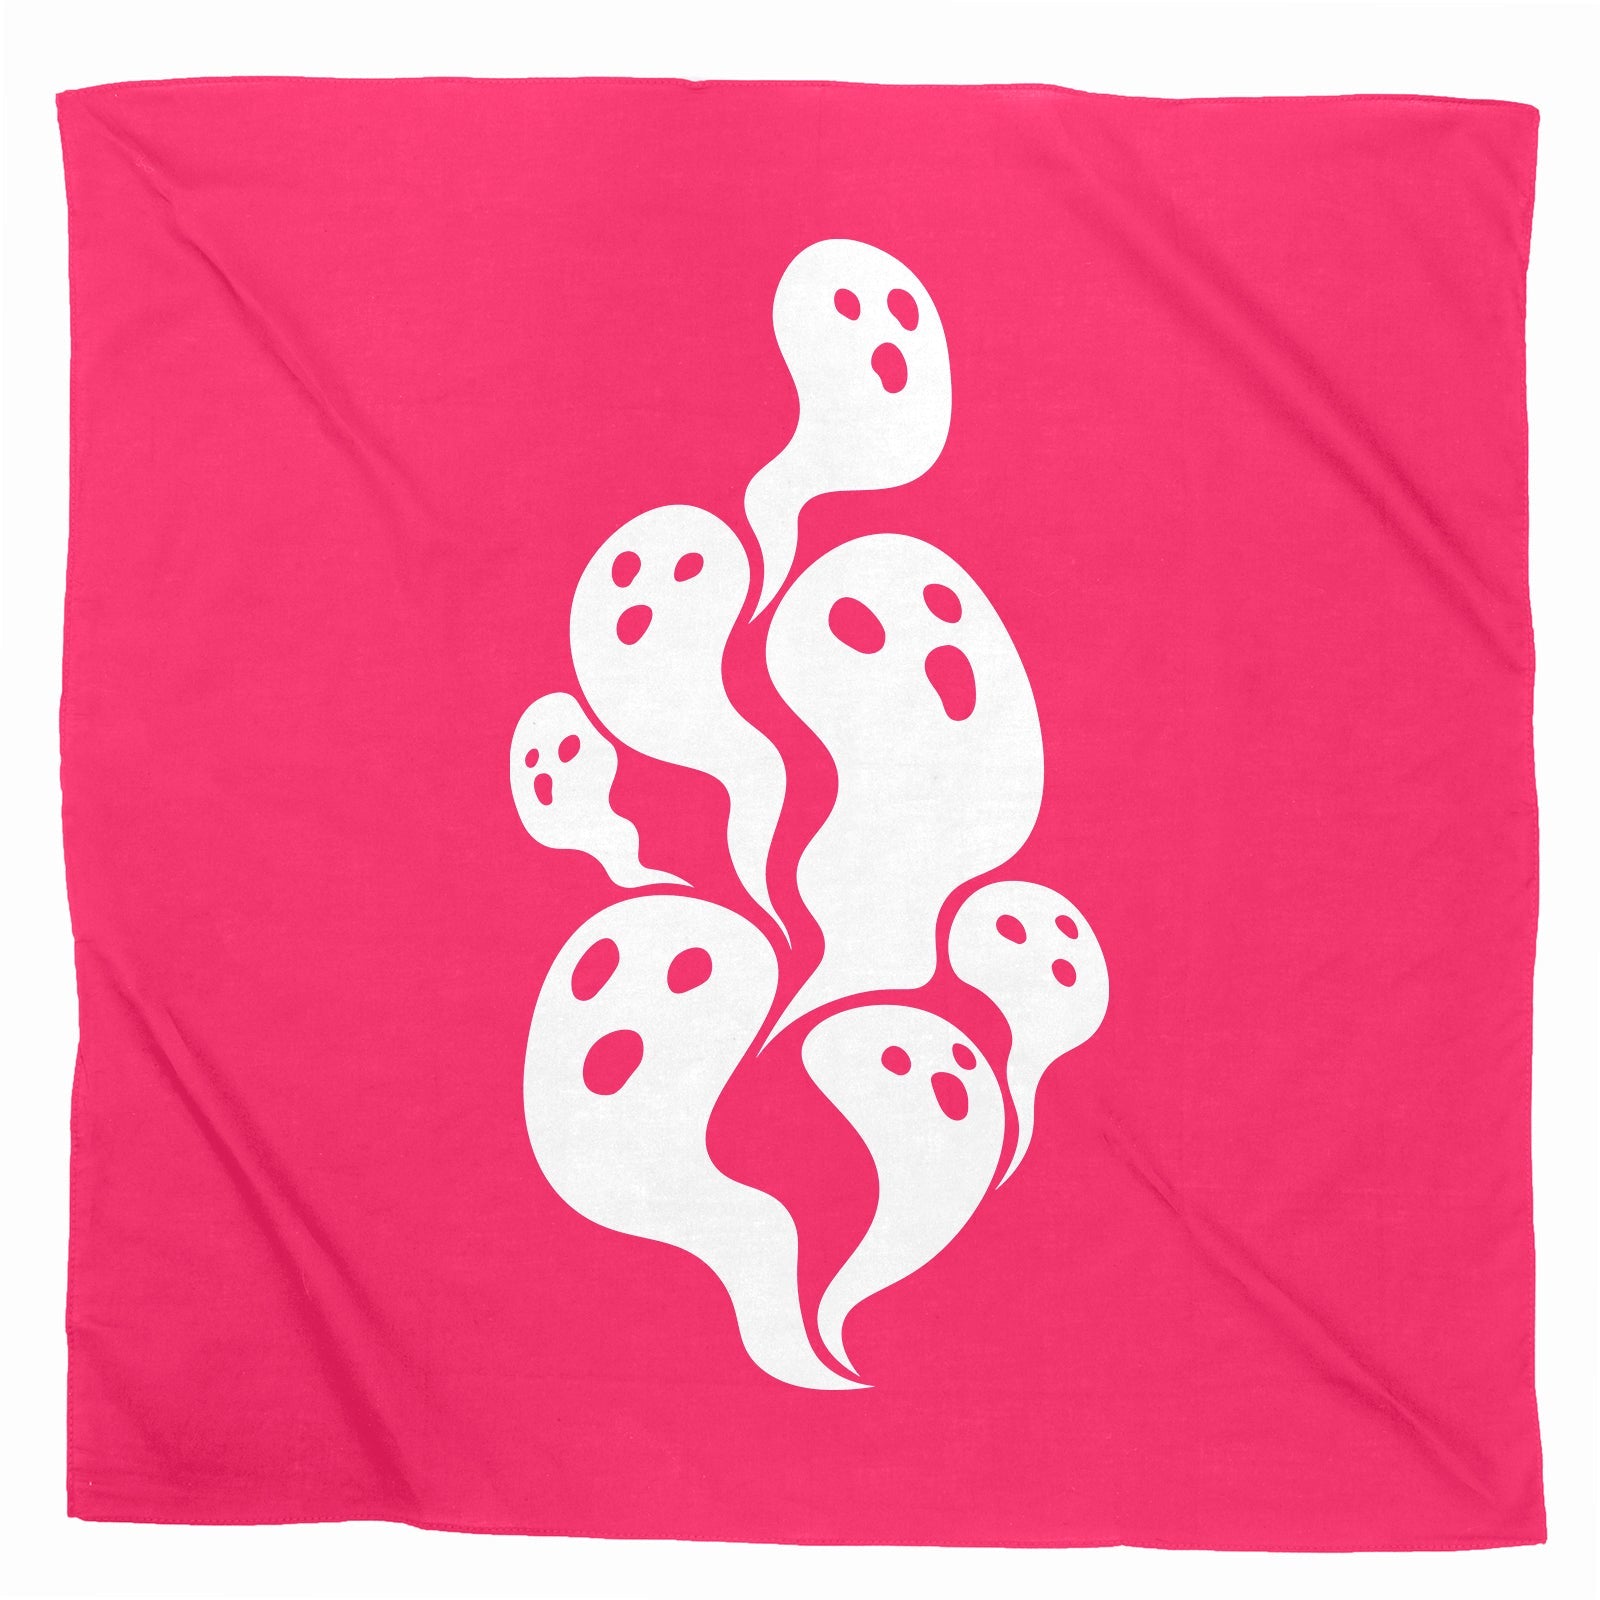 Halloween Ghost Gang Wall Tapestry - Mato & Hash